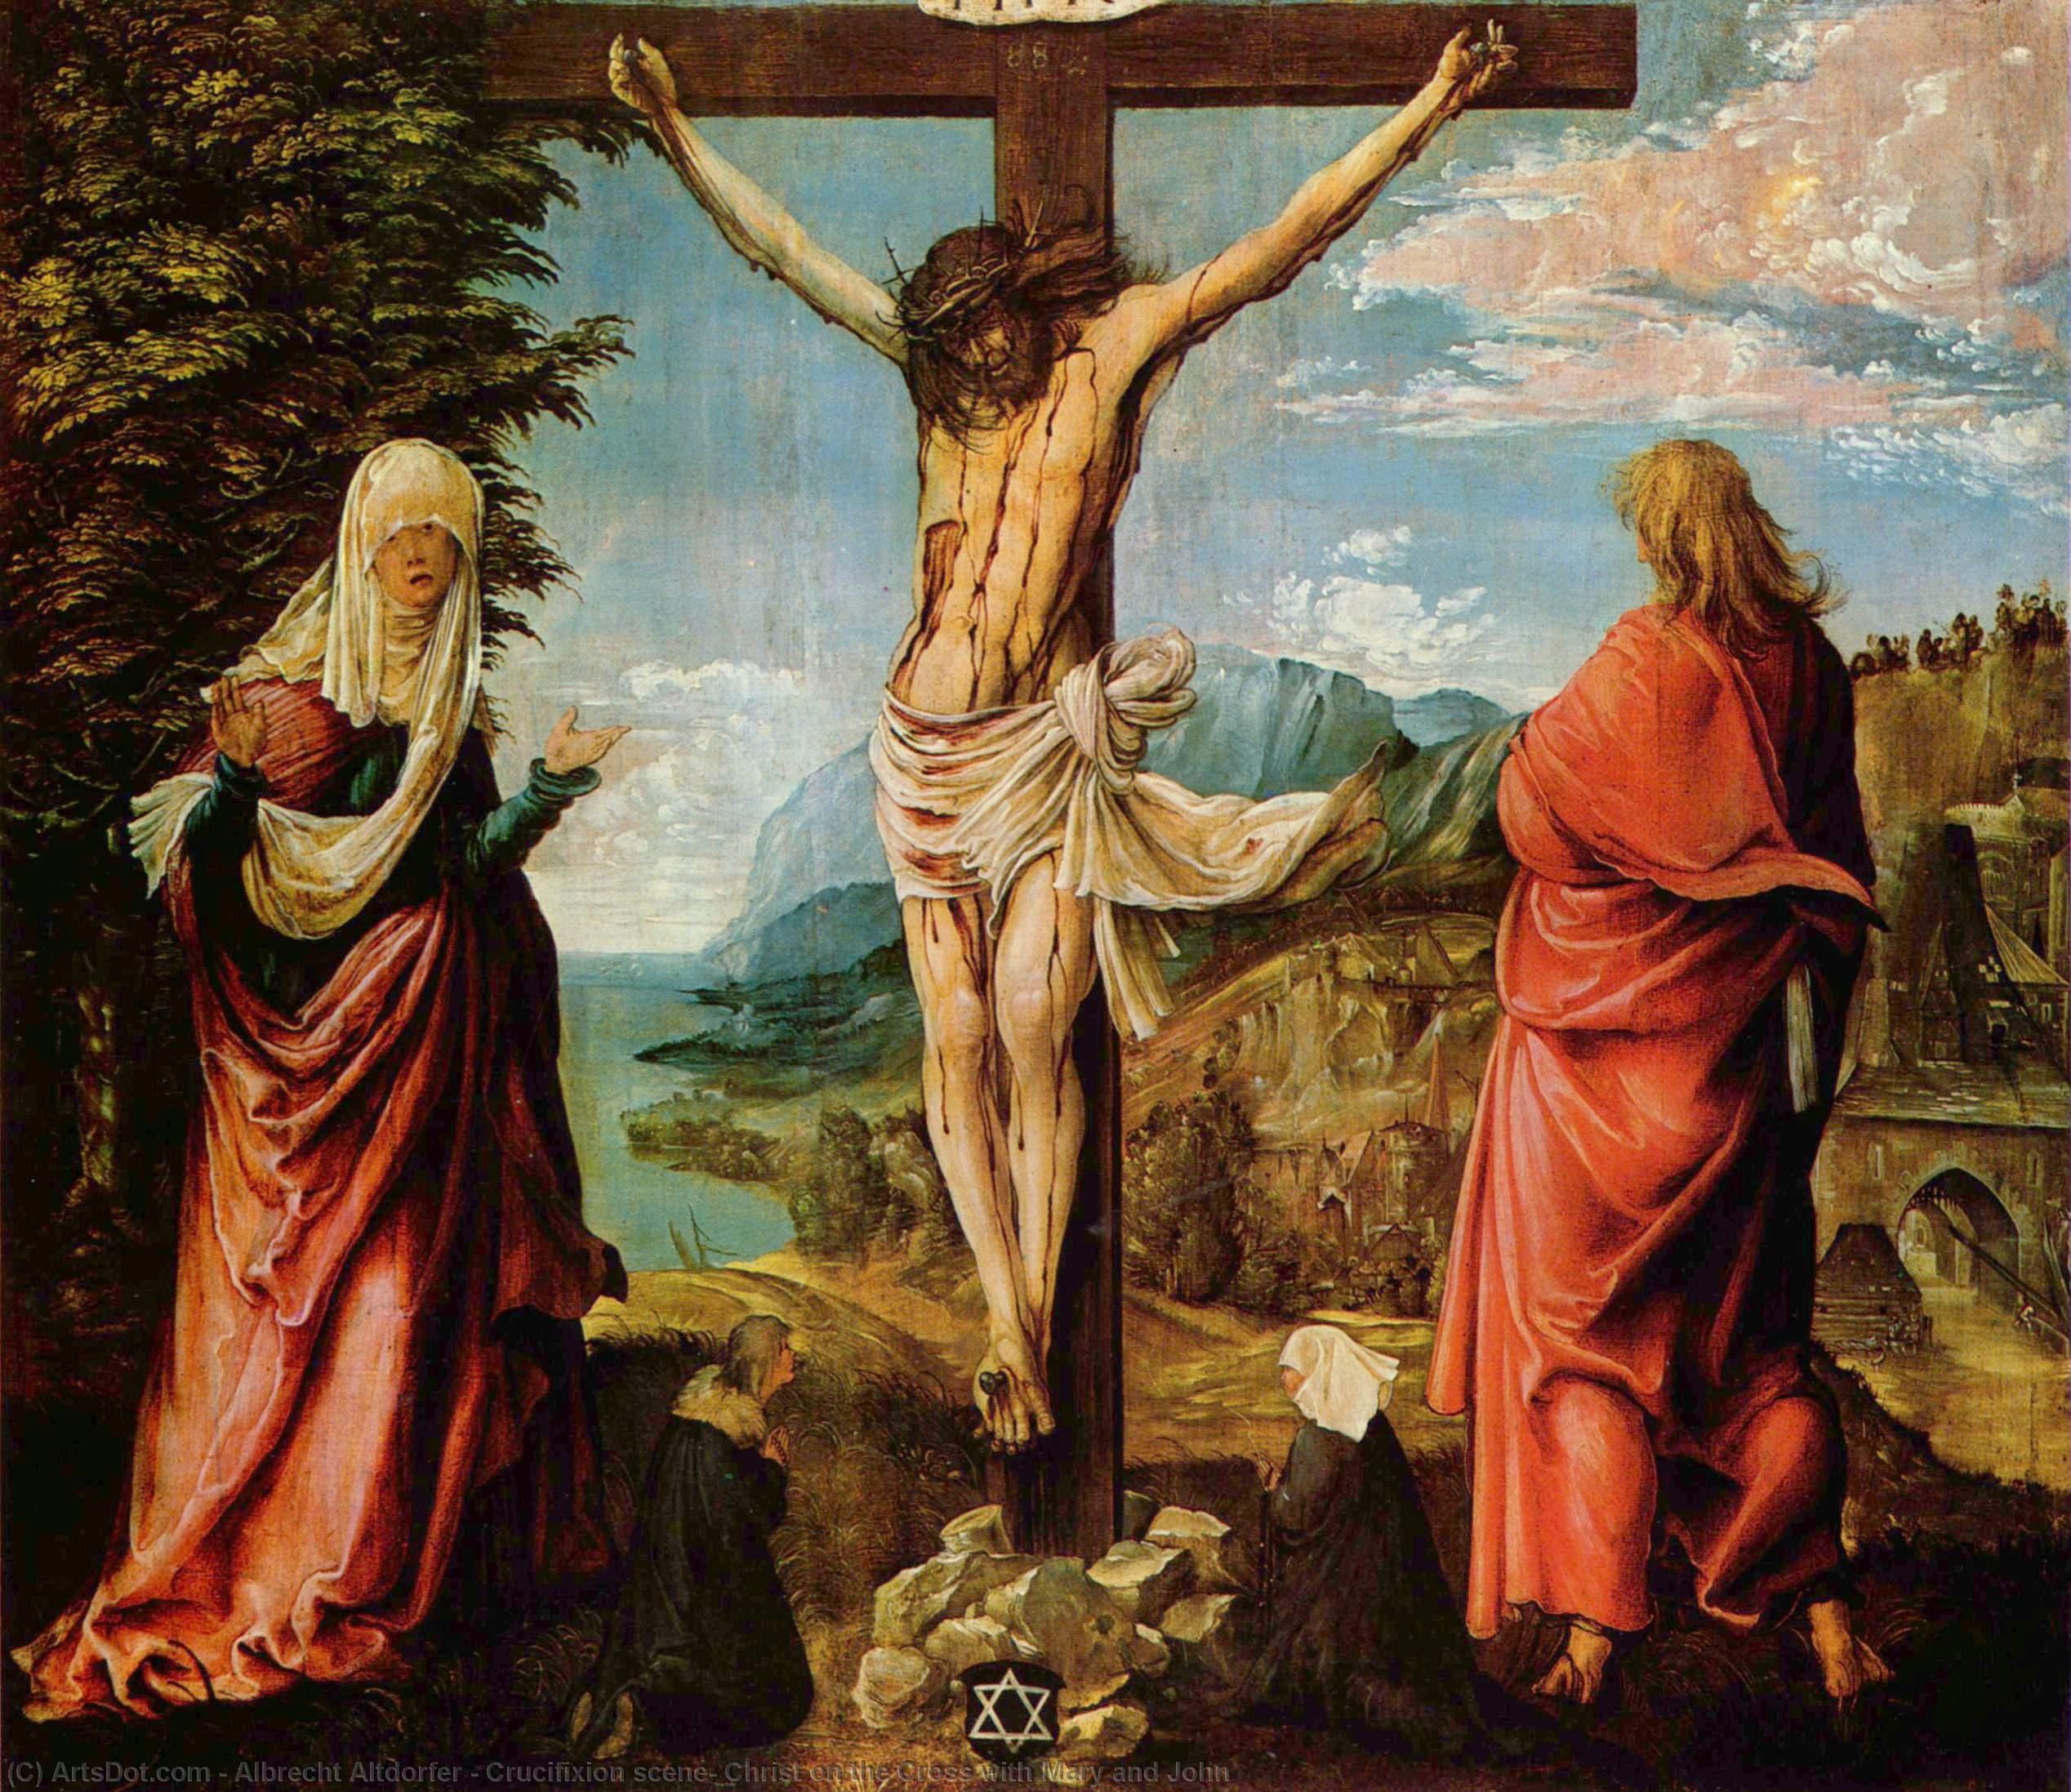 WikiOO.org - Encyclopedia of Fine Arts - Maleri, Artwork Albrecht Altdorfer - Crucifixion scene, Christ on the Cross with Mary and John